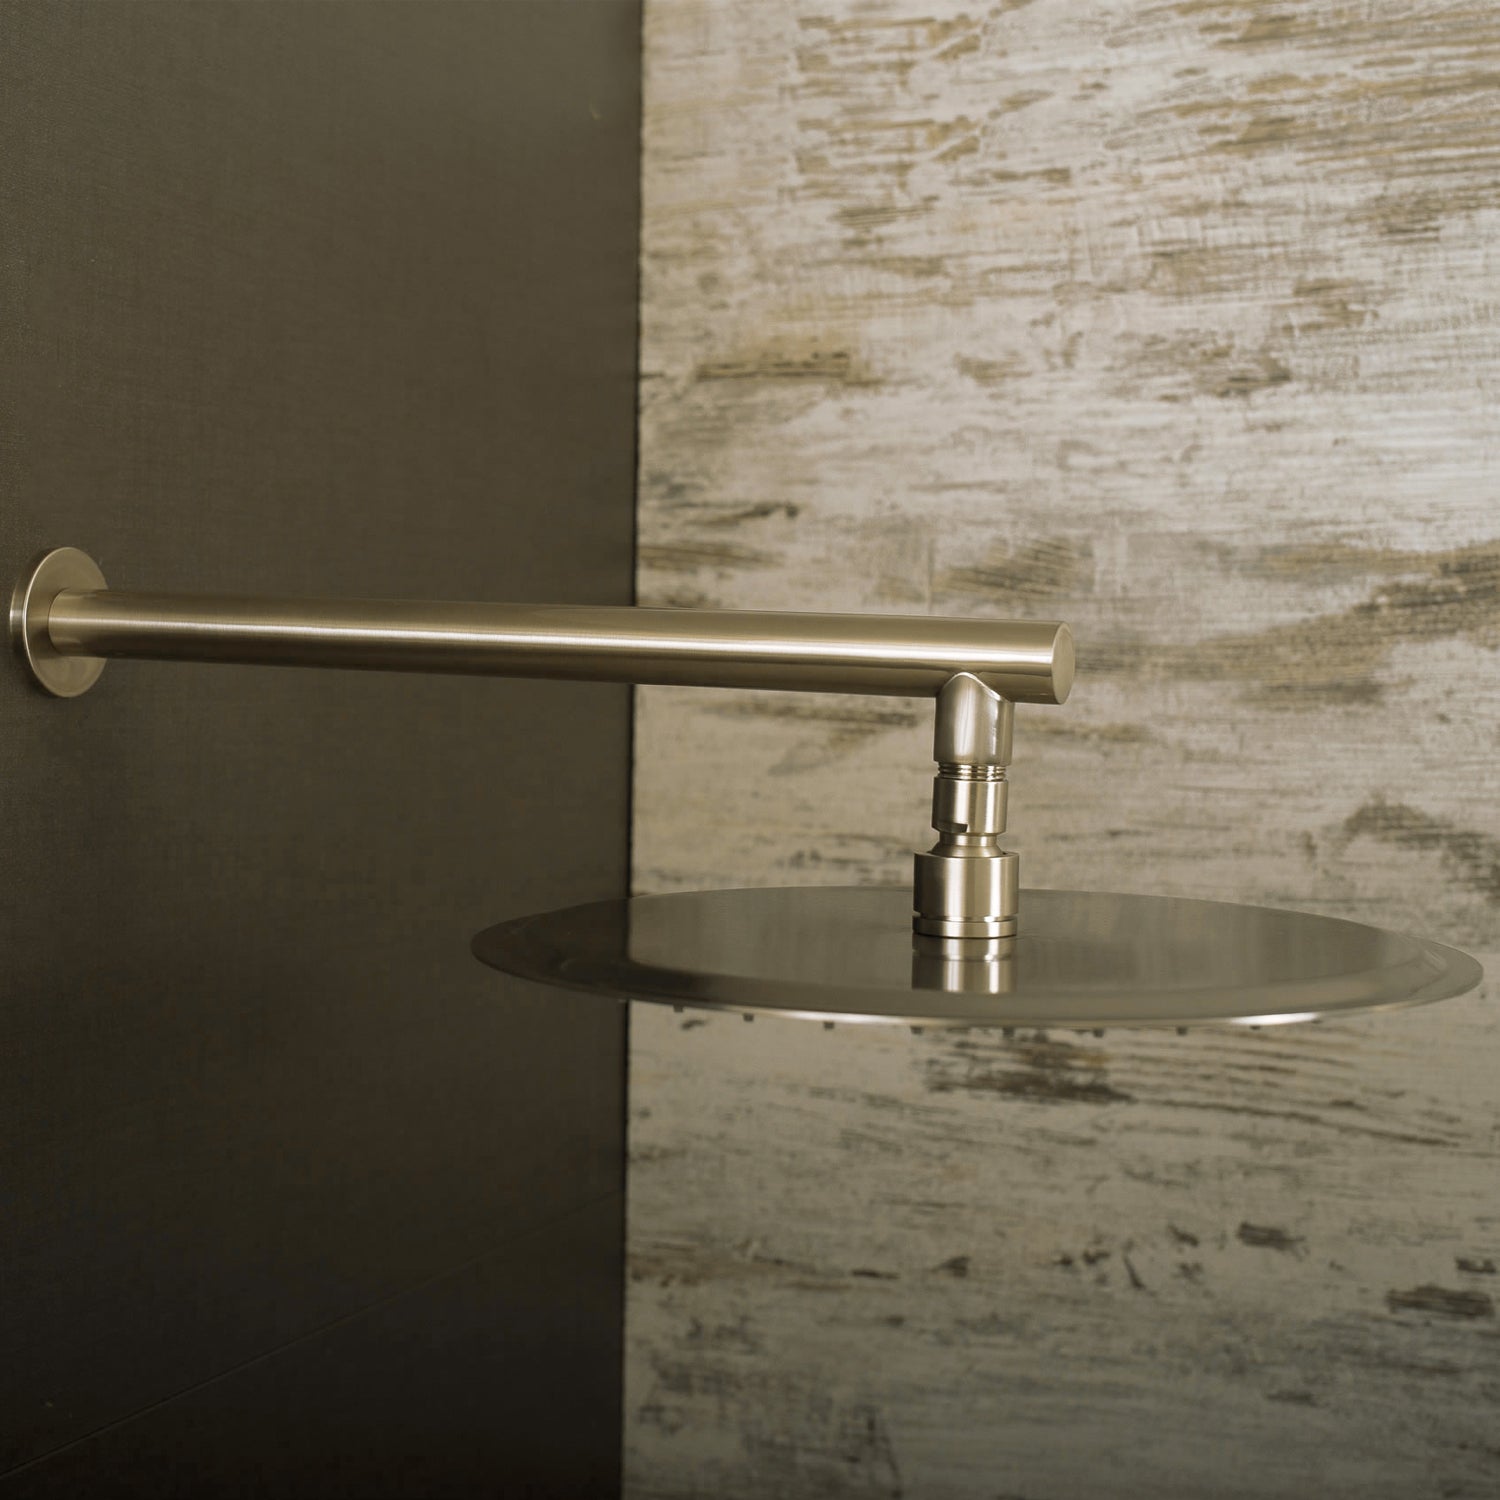 DAX Round Shower Arm, Brass Body, Wall Mount, Brushed Nickel Finish, 15 Inches (D-F04-15-BN)